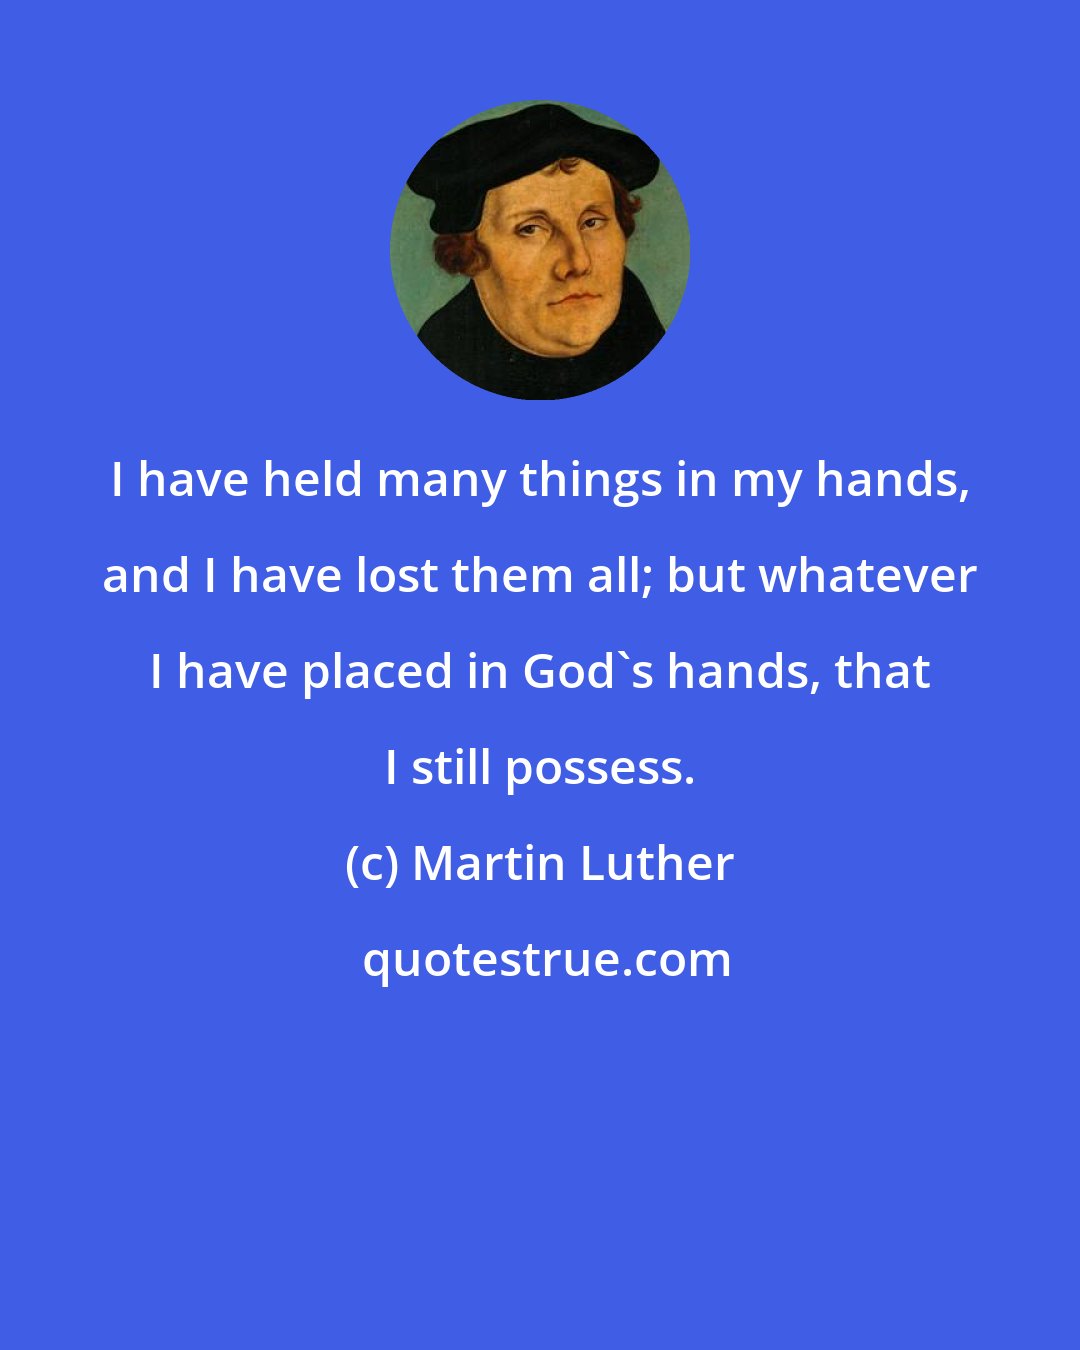 Martin Luther: I have held many things in my hands, and I have lost them all; but whatever I have placed in God's hands, that I still possess.